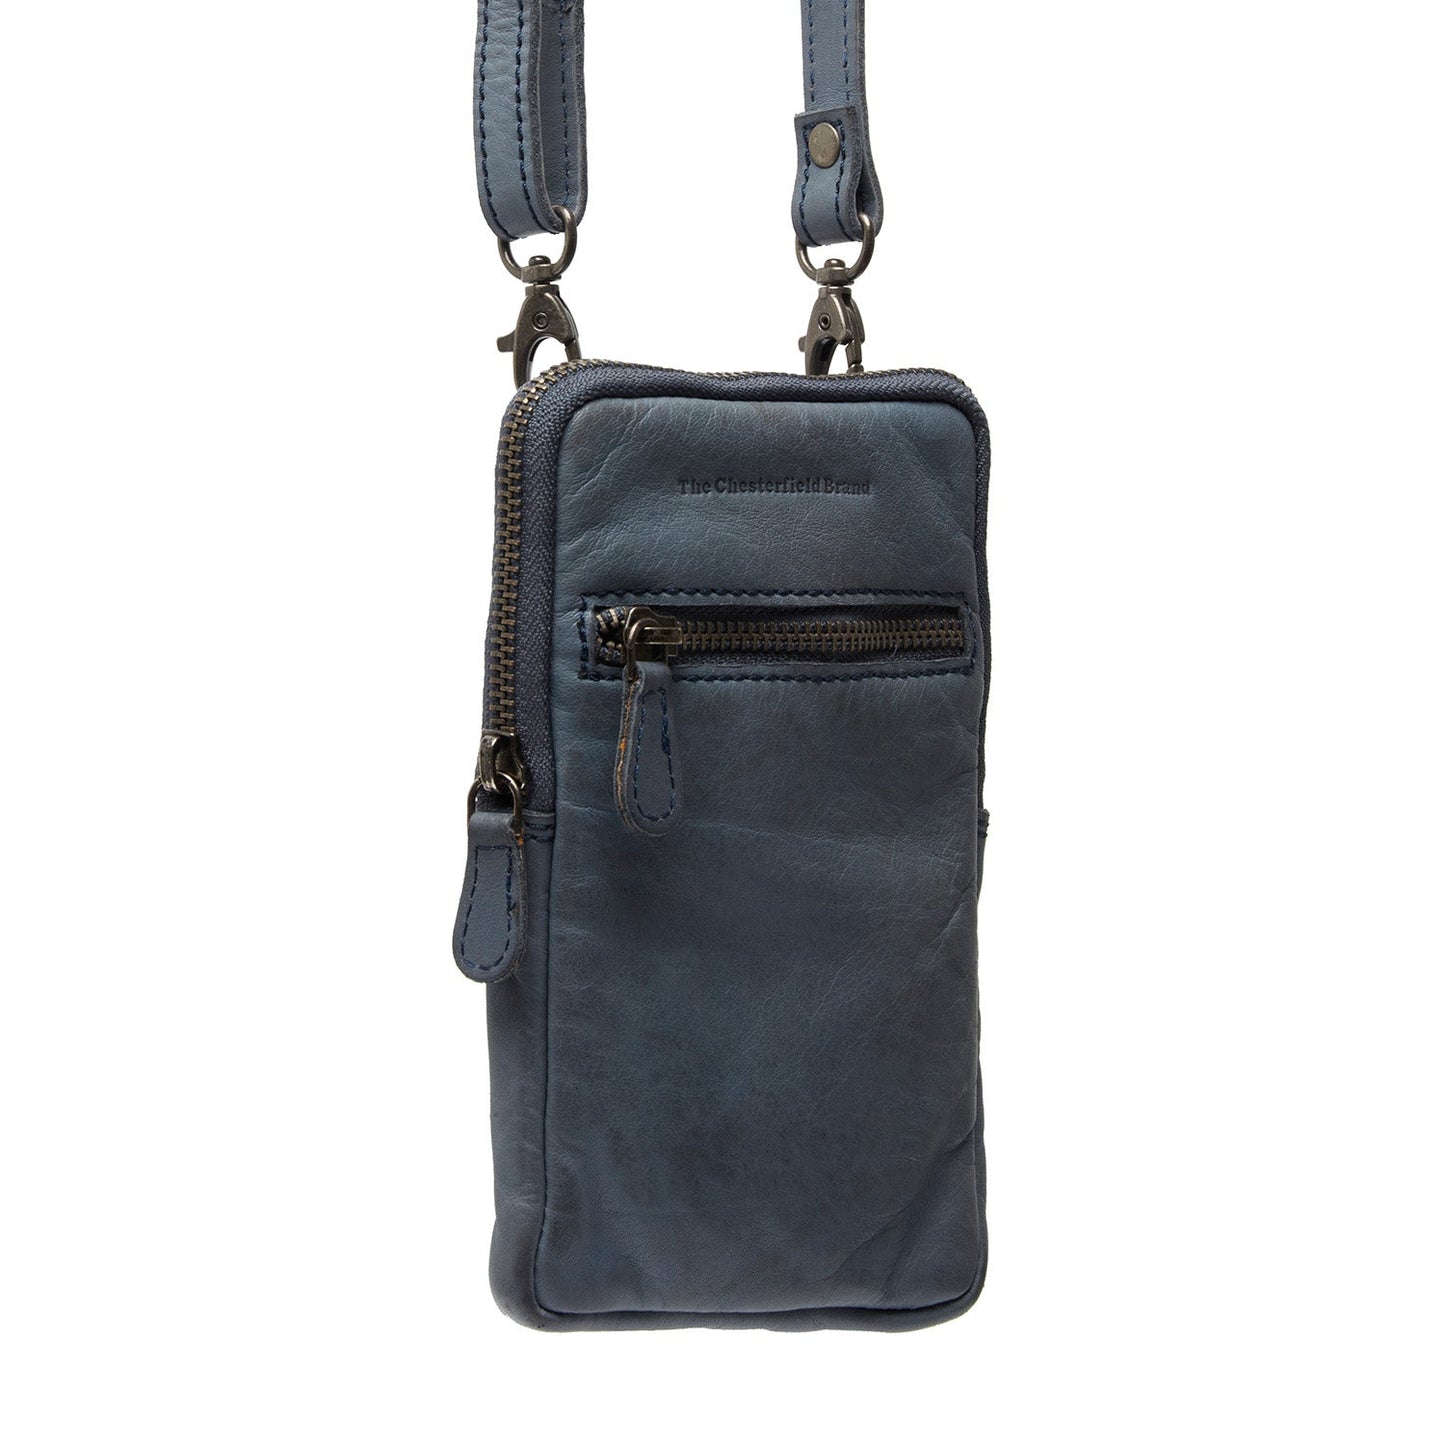 Handytasche Salta waxed washed pull up Leder von The Chesterfield Brand - Laure Bags and Travel